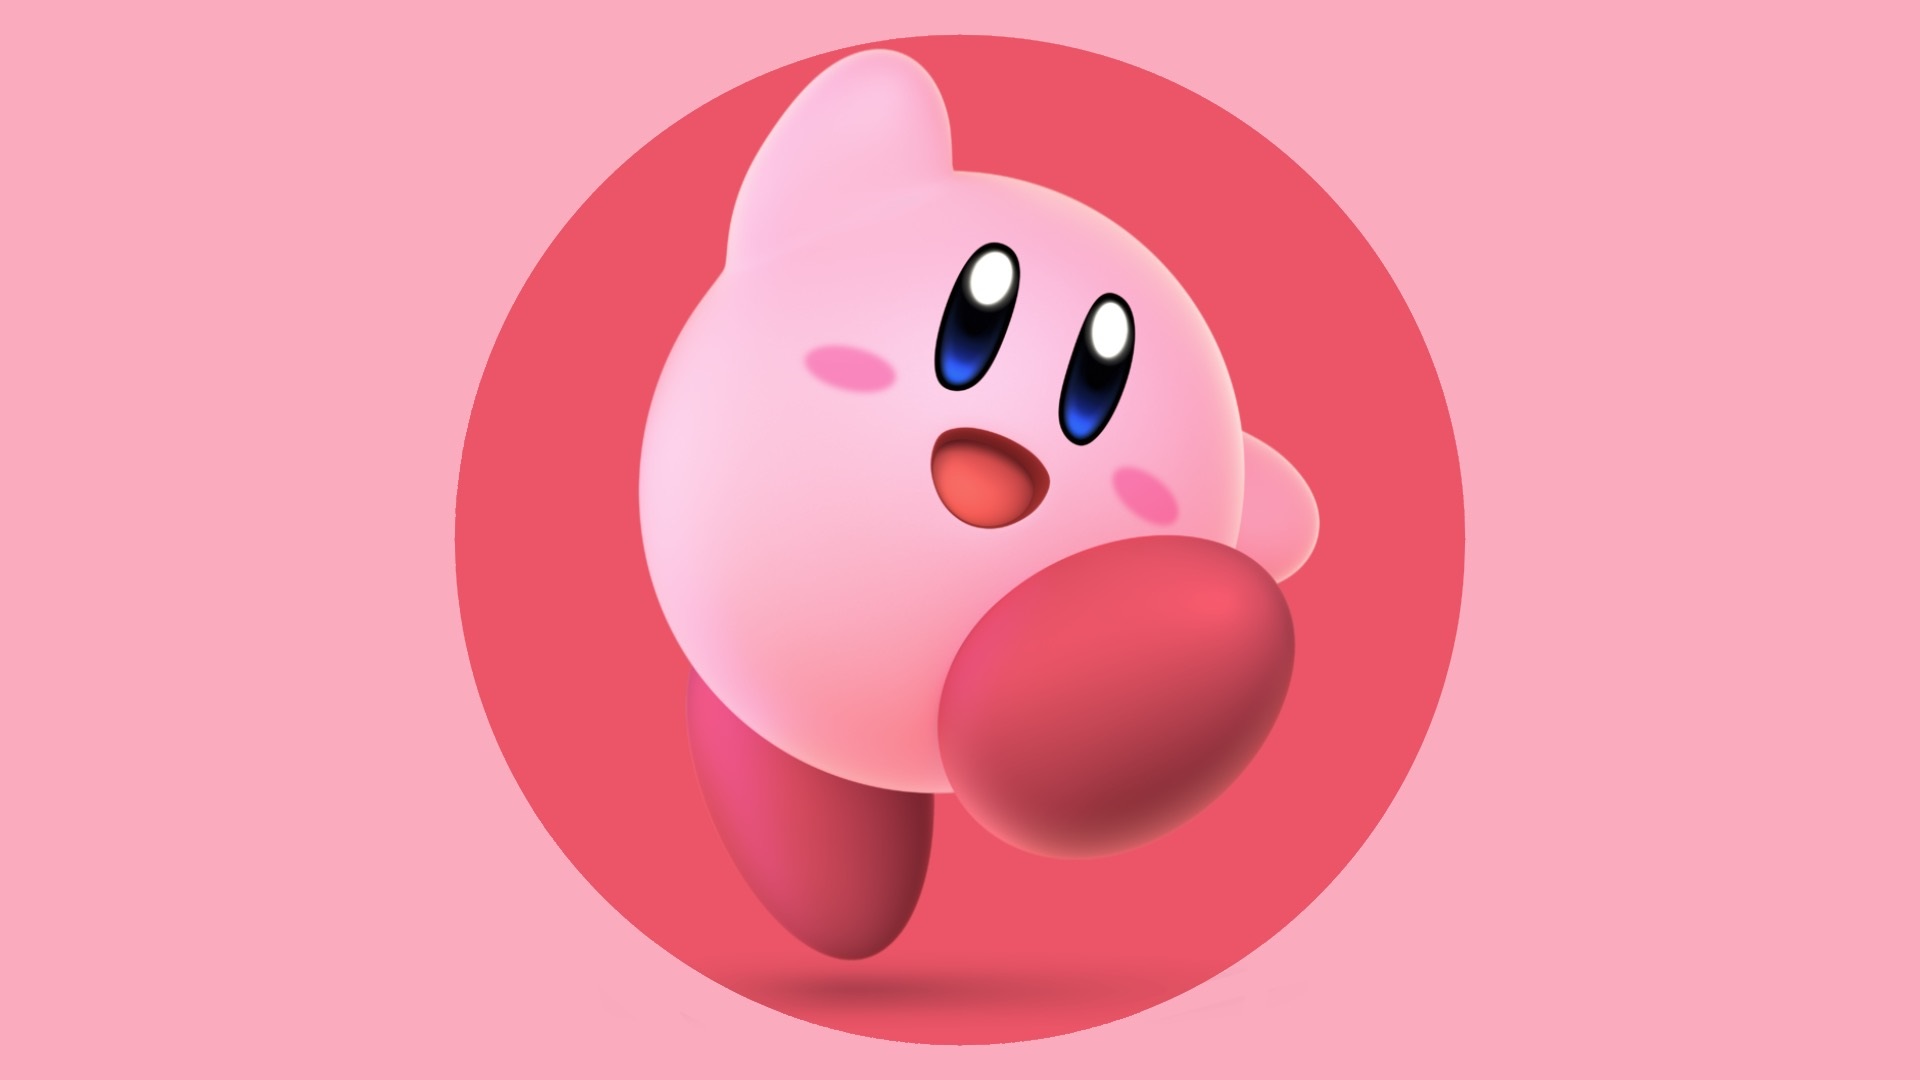 General 1920x1080 Super Smash Bros. Ultimate pink Nintendo Kirby simple background video games video game characters